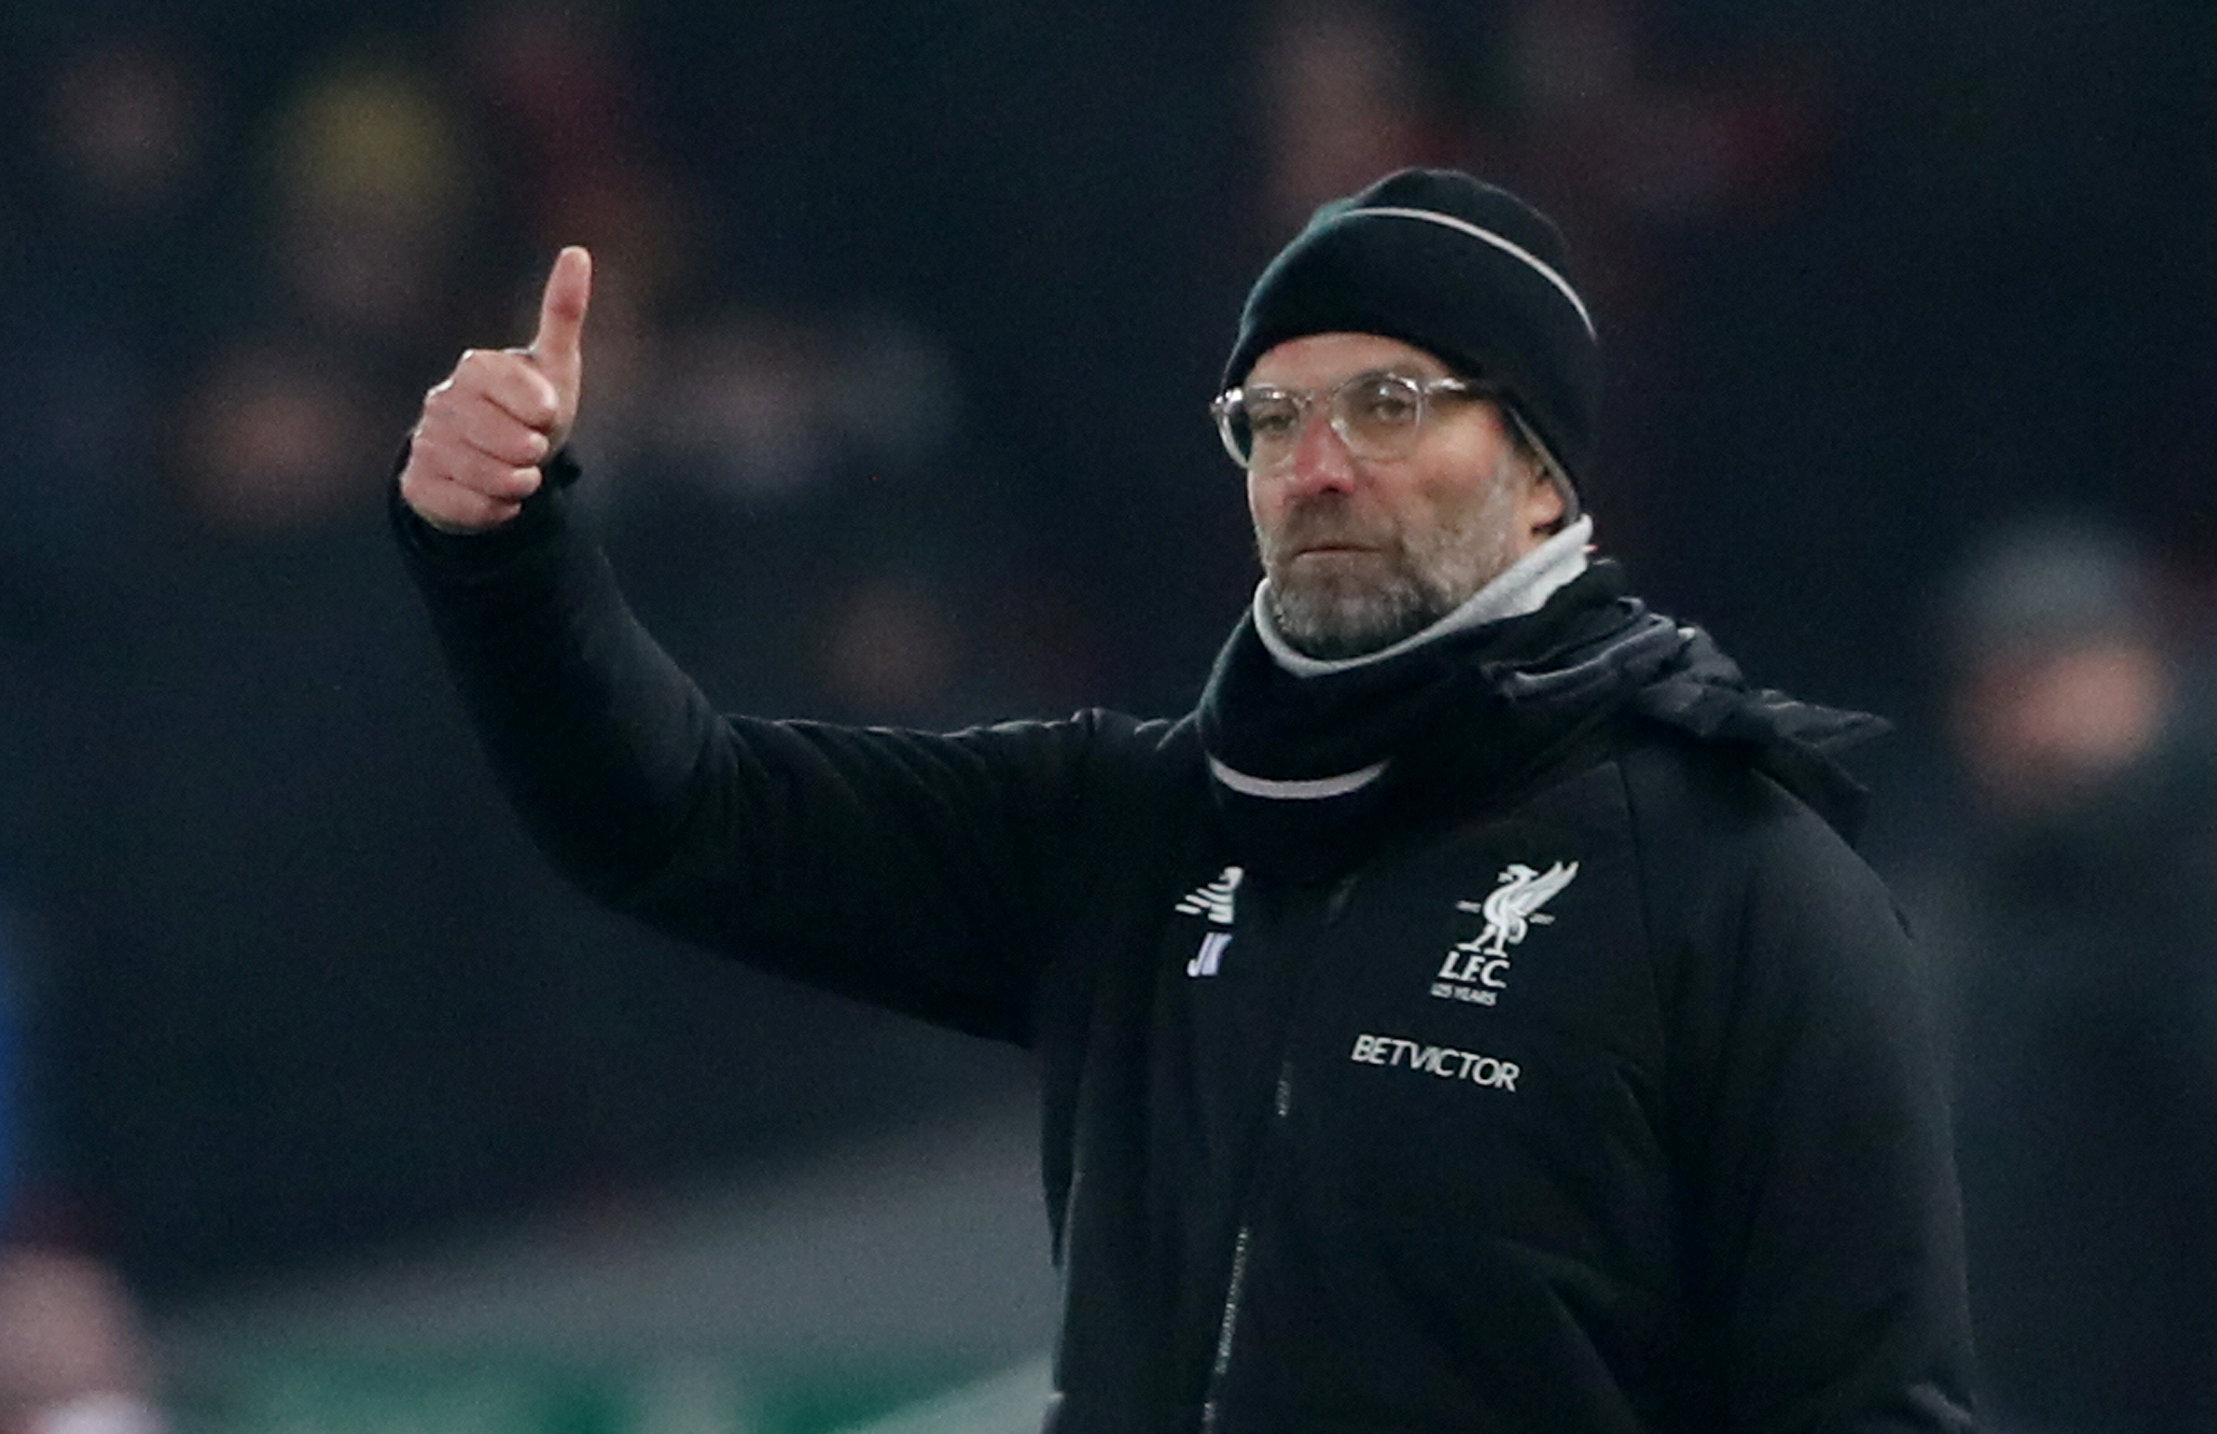 Football: Liverpool's Klopp rules out fielding second-string side against Porto